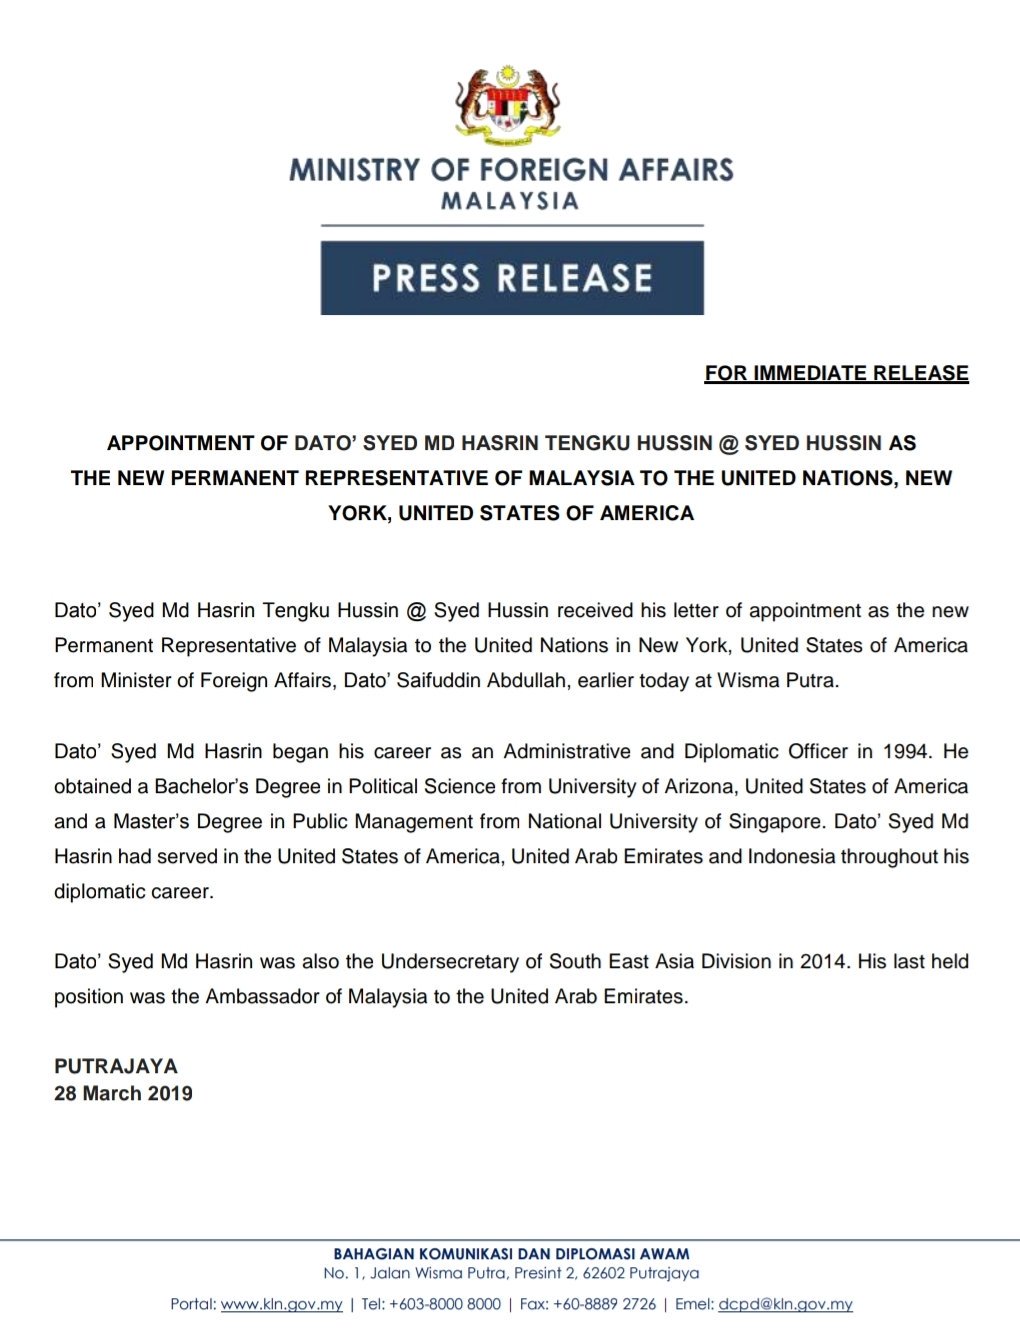 Wisma Putra On Twitter Press Release Appointment Of Dato Syed Md Hasrin Tengku Hussin Syed Hussin As The New Permanent Representative Of Malaysia To The United Nations New York United States